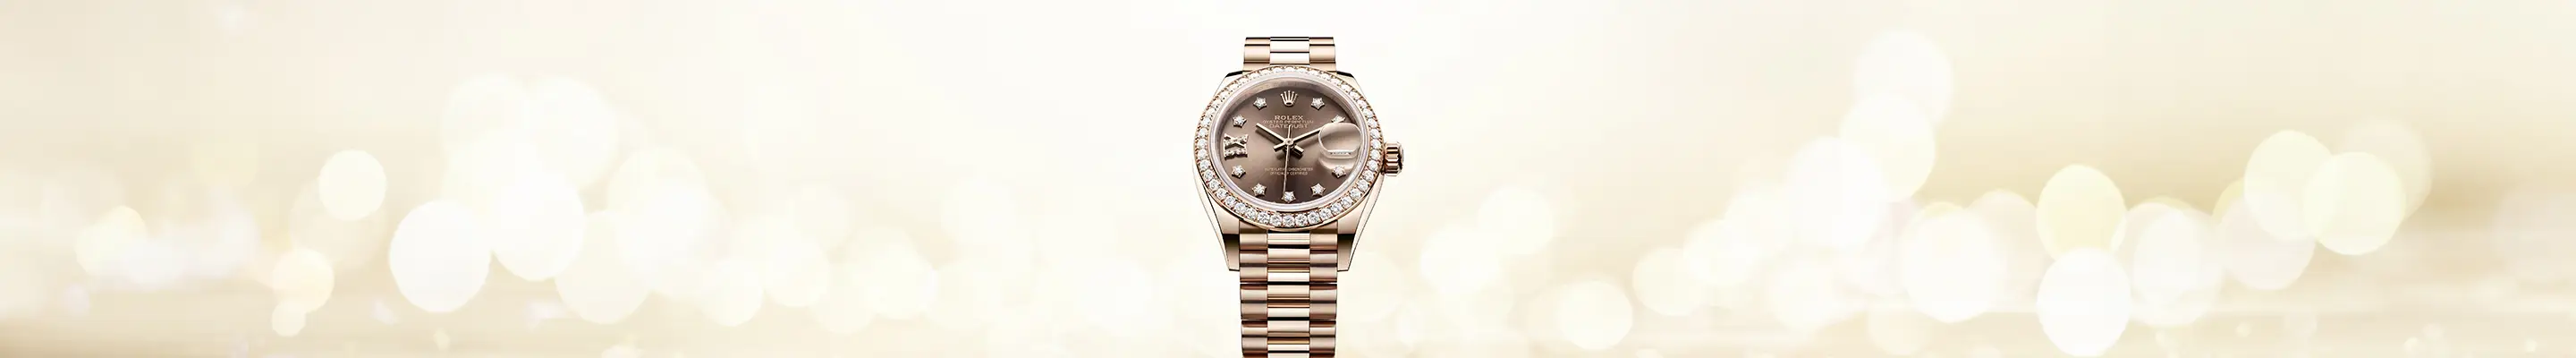 Lady Datejust Banner Image